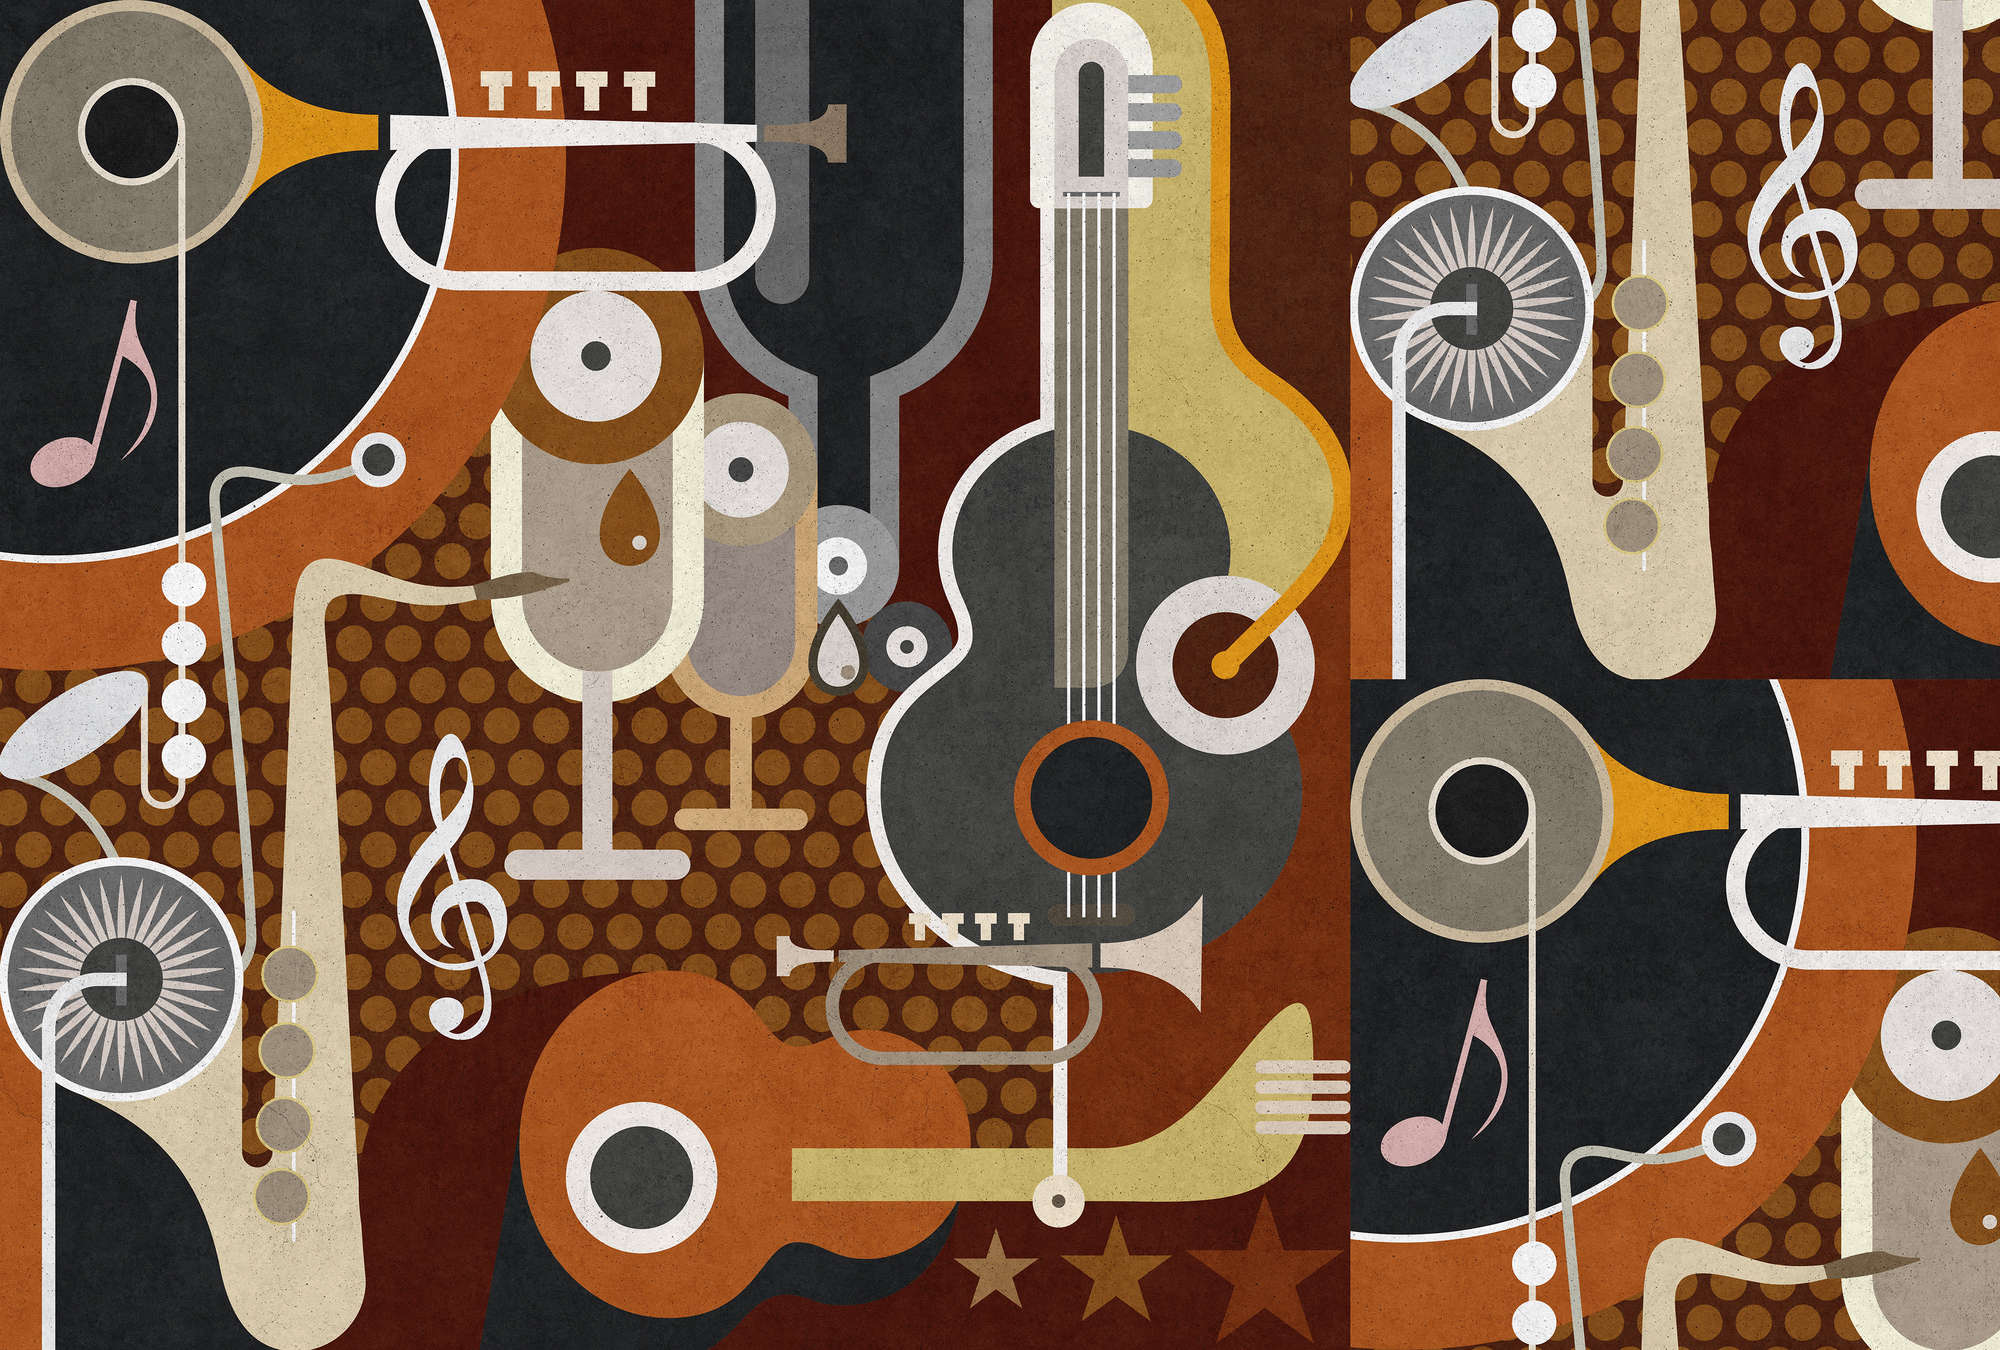             Wall of sound 1 - Concrete structure wallpaper, abstract musical instruments - Beige, Brown | Matt smooth non-woven
        